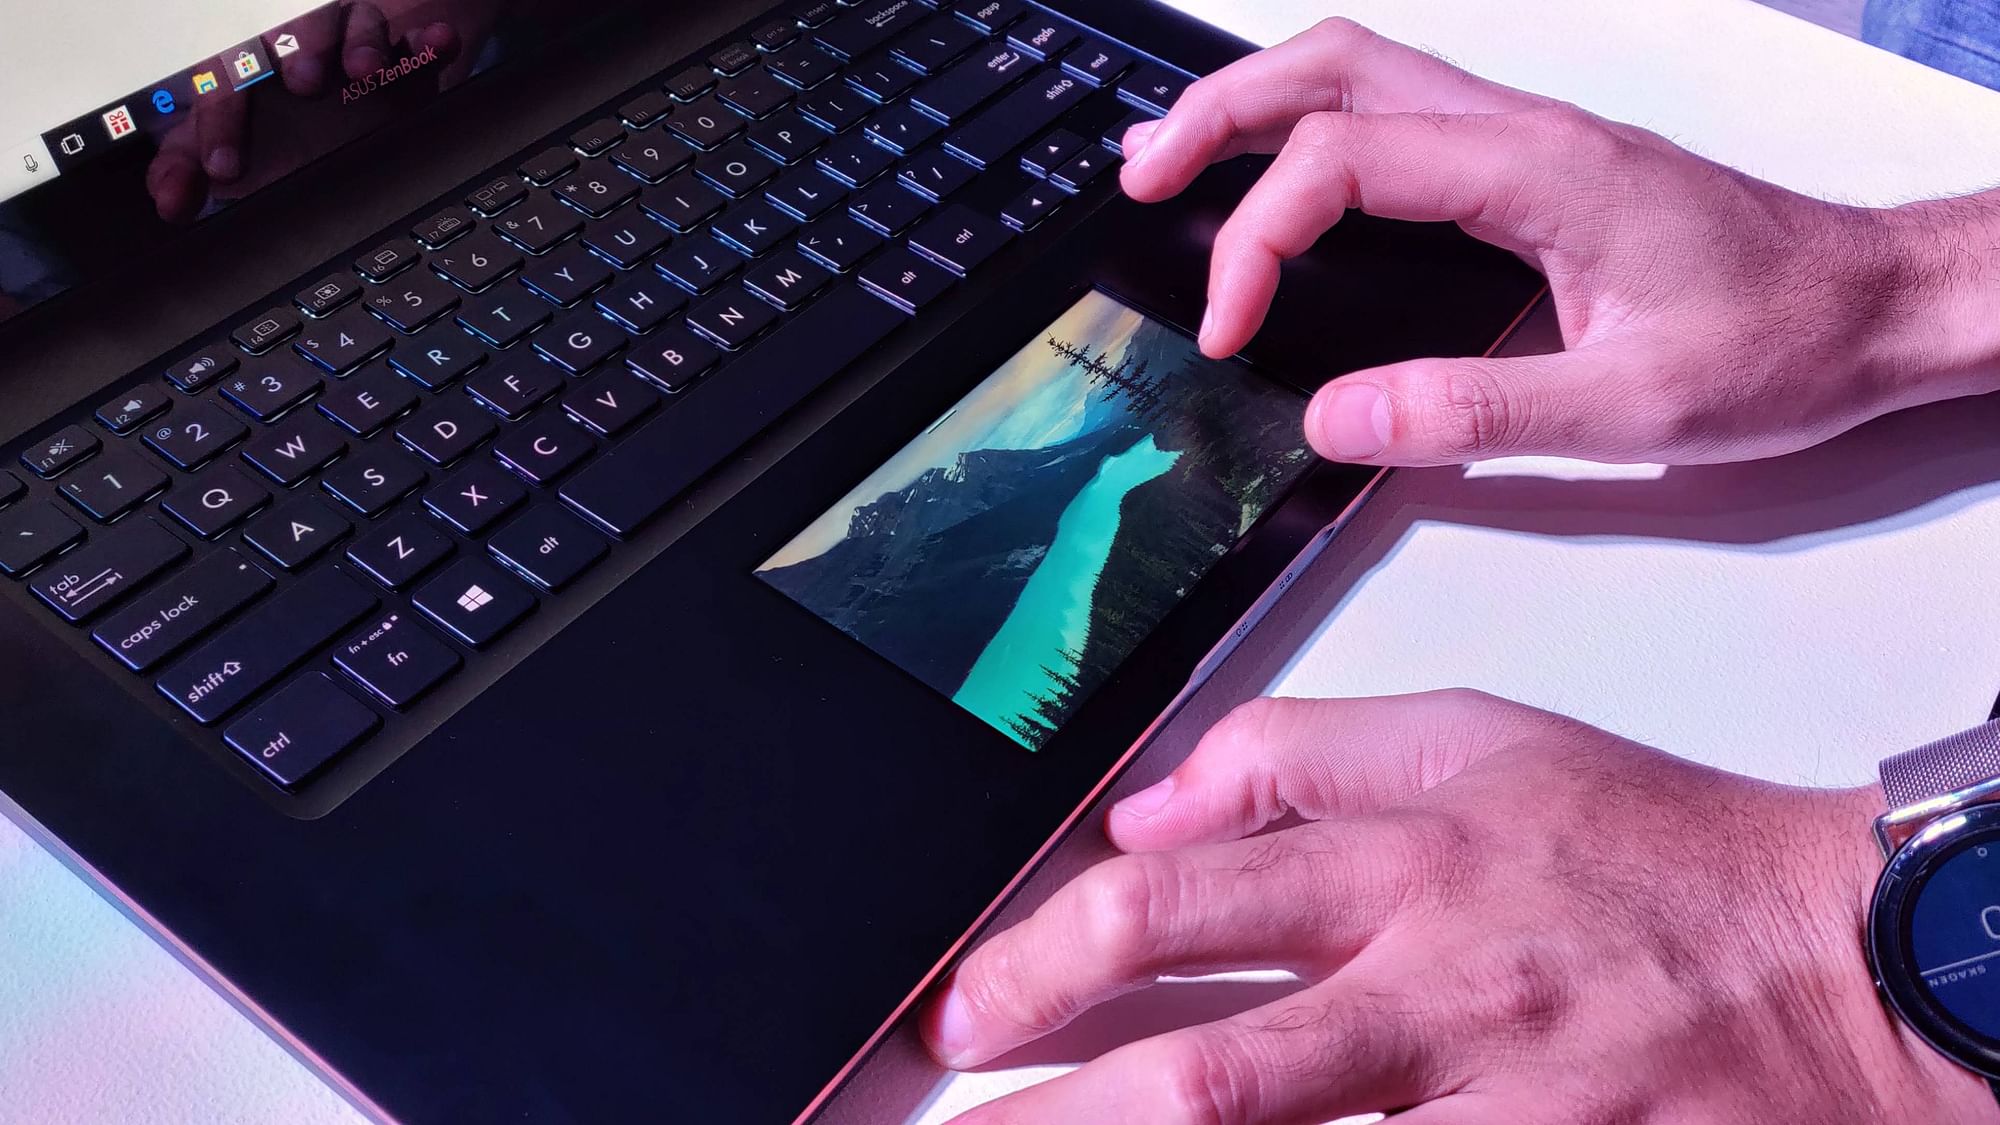 The Zenbook Pro has a display in the touch pad as well.&nbsp;